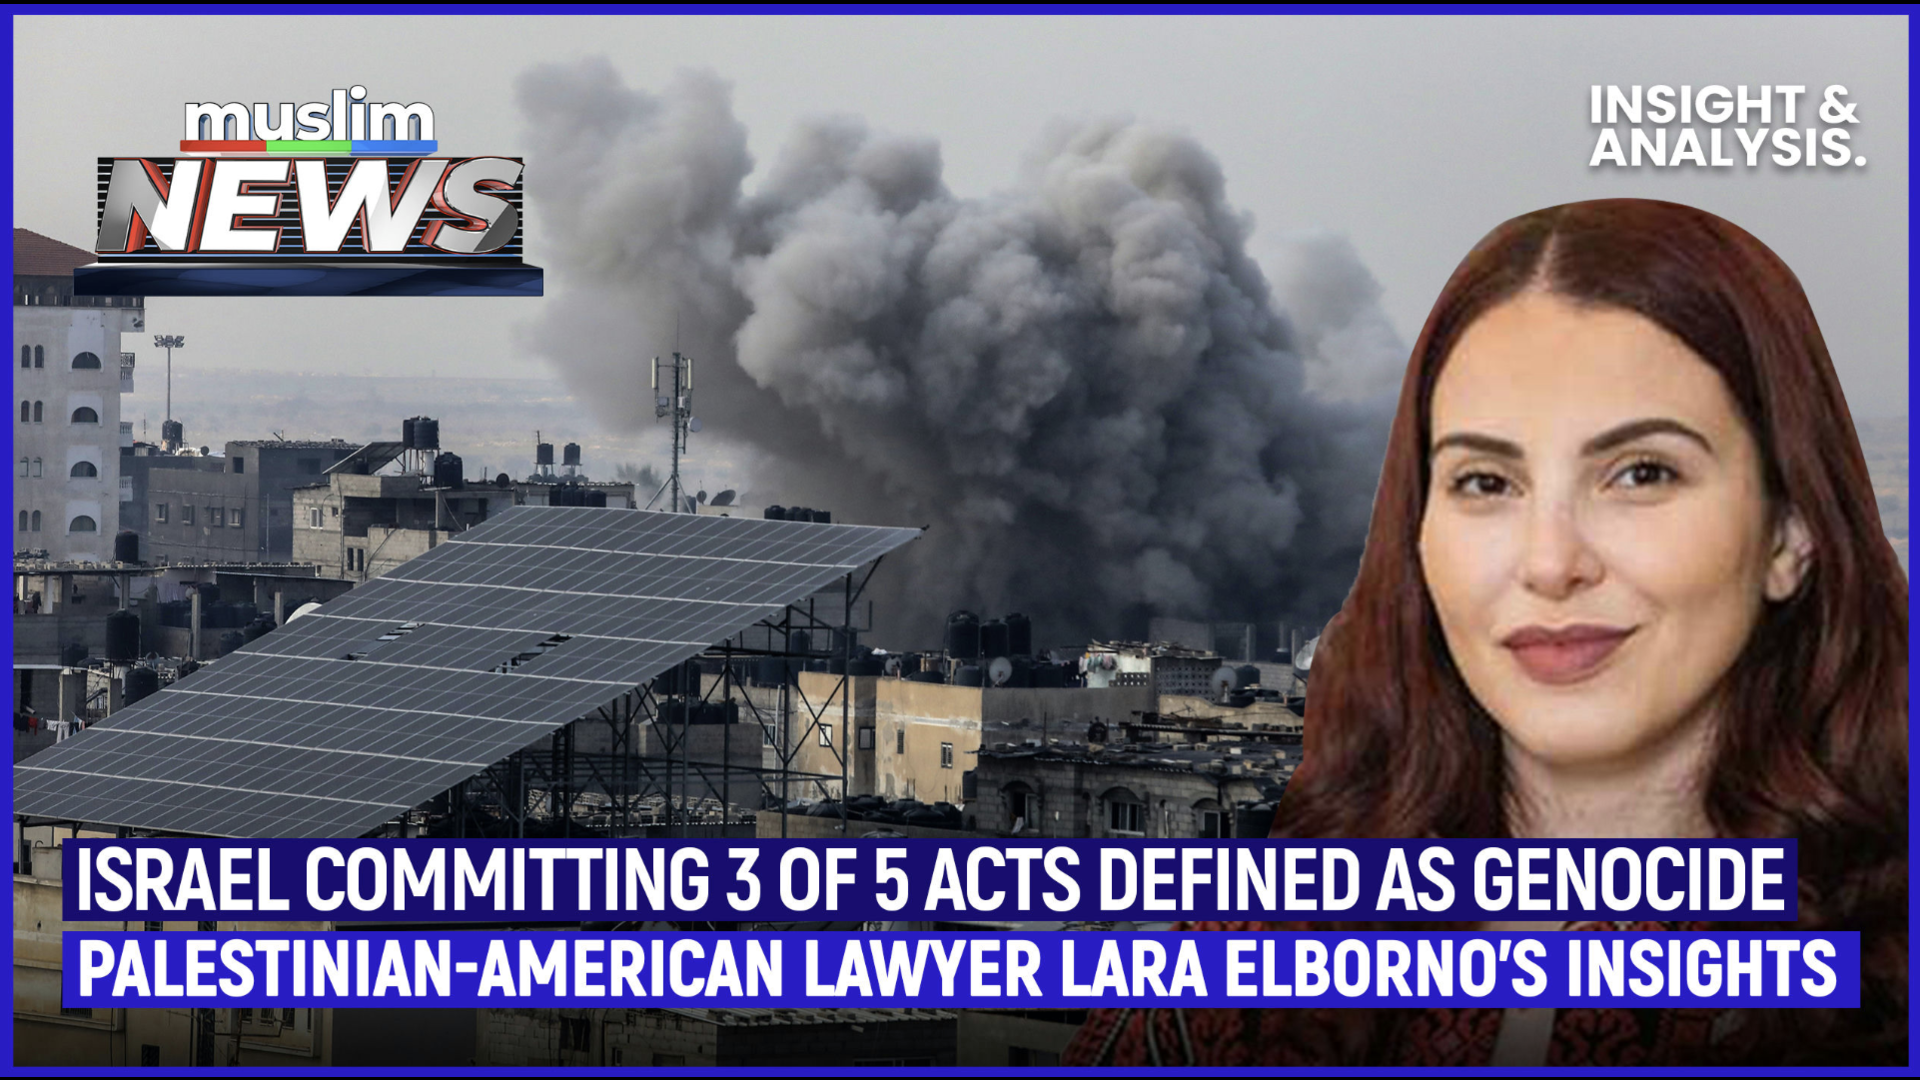 Israel Clearly Committing 3 of 5 Acts Defined As Genocide: Lara Elborno